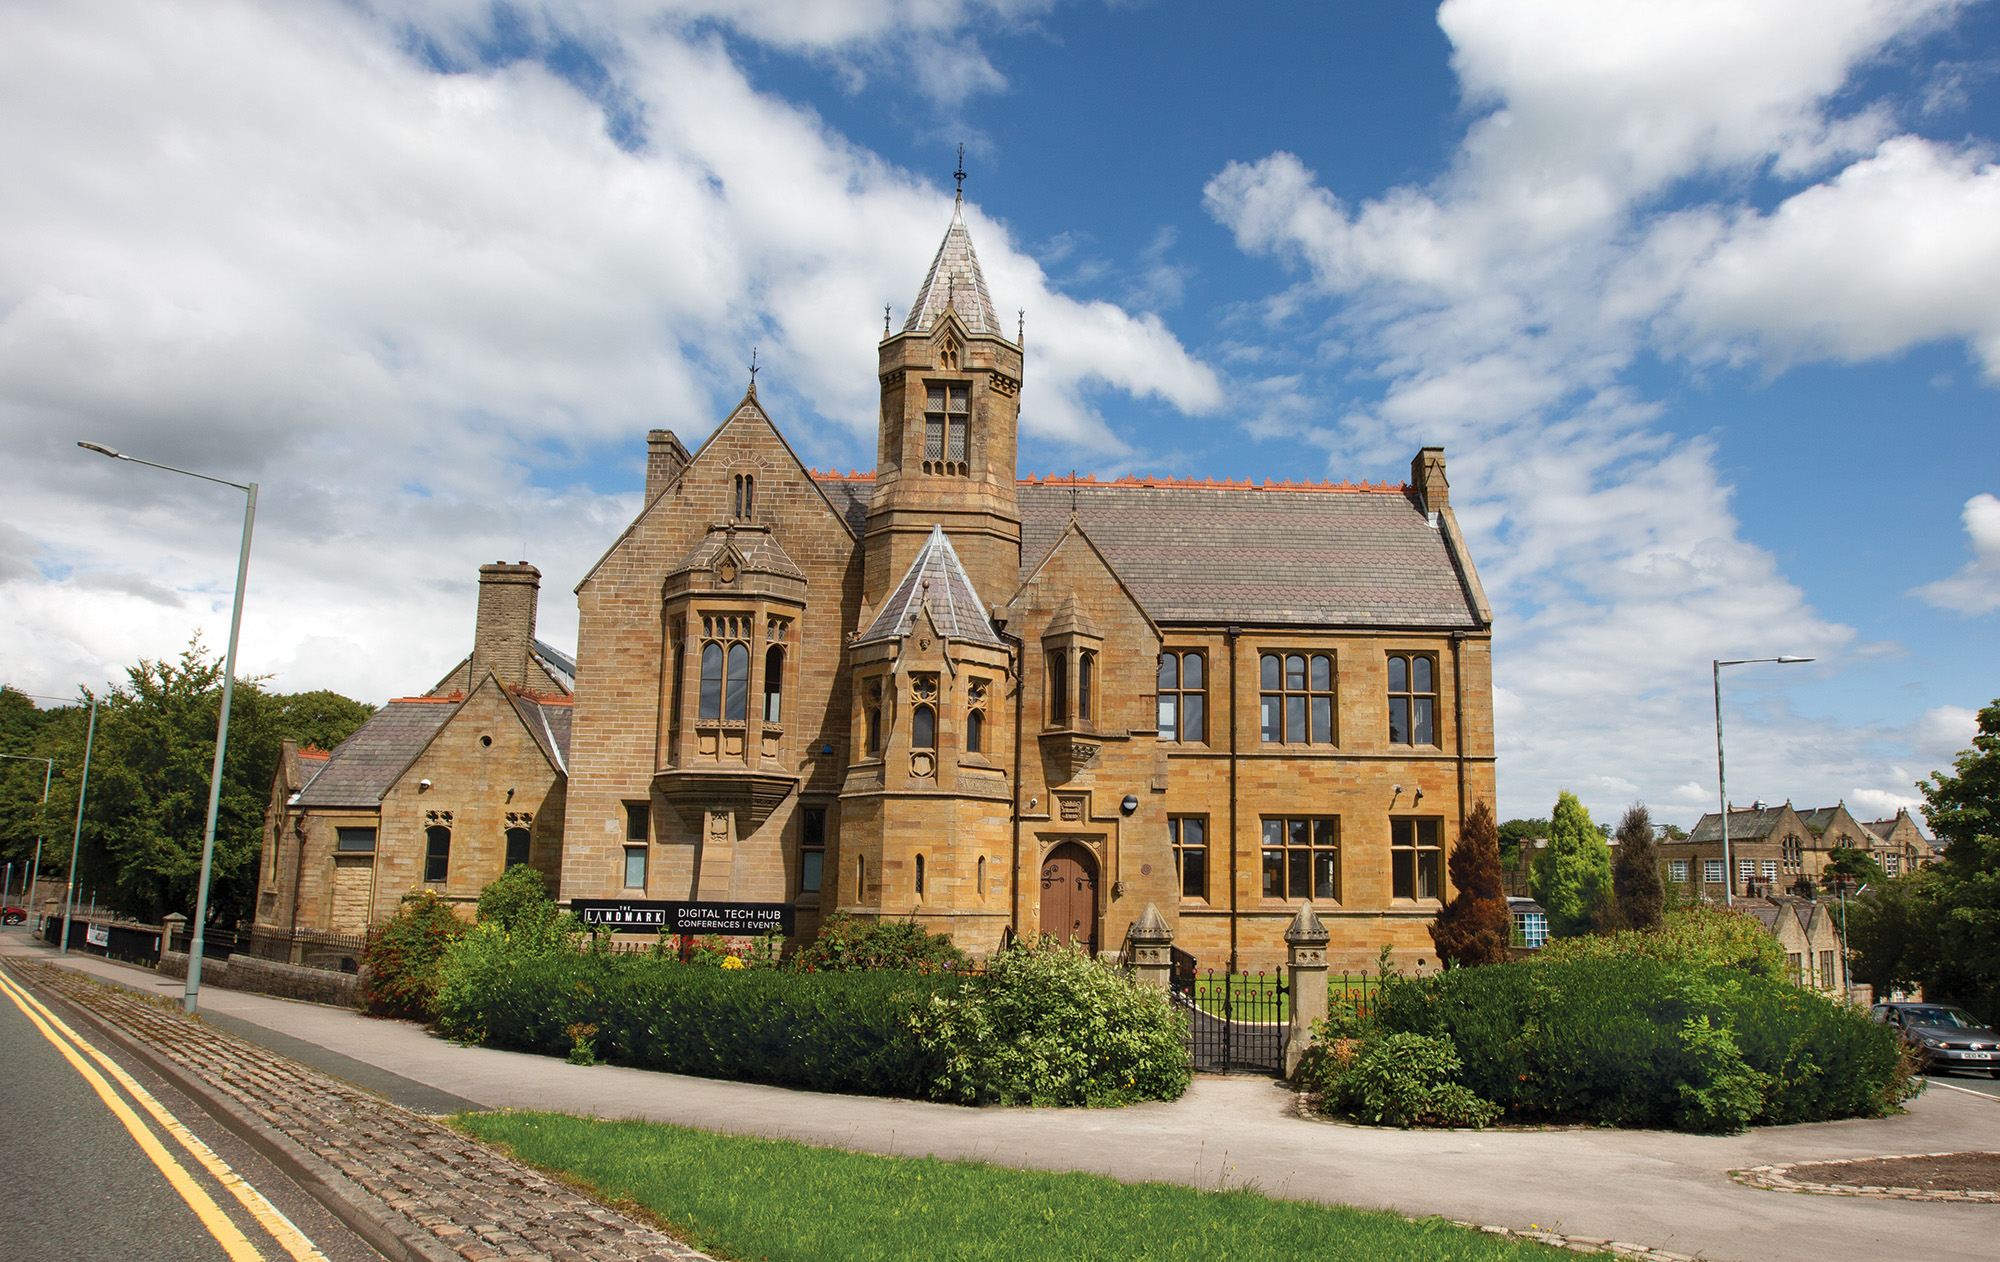 Spectacular £2.5m restoration project of Grade II listed former Burnley Grammar School is now complete